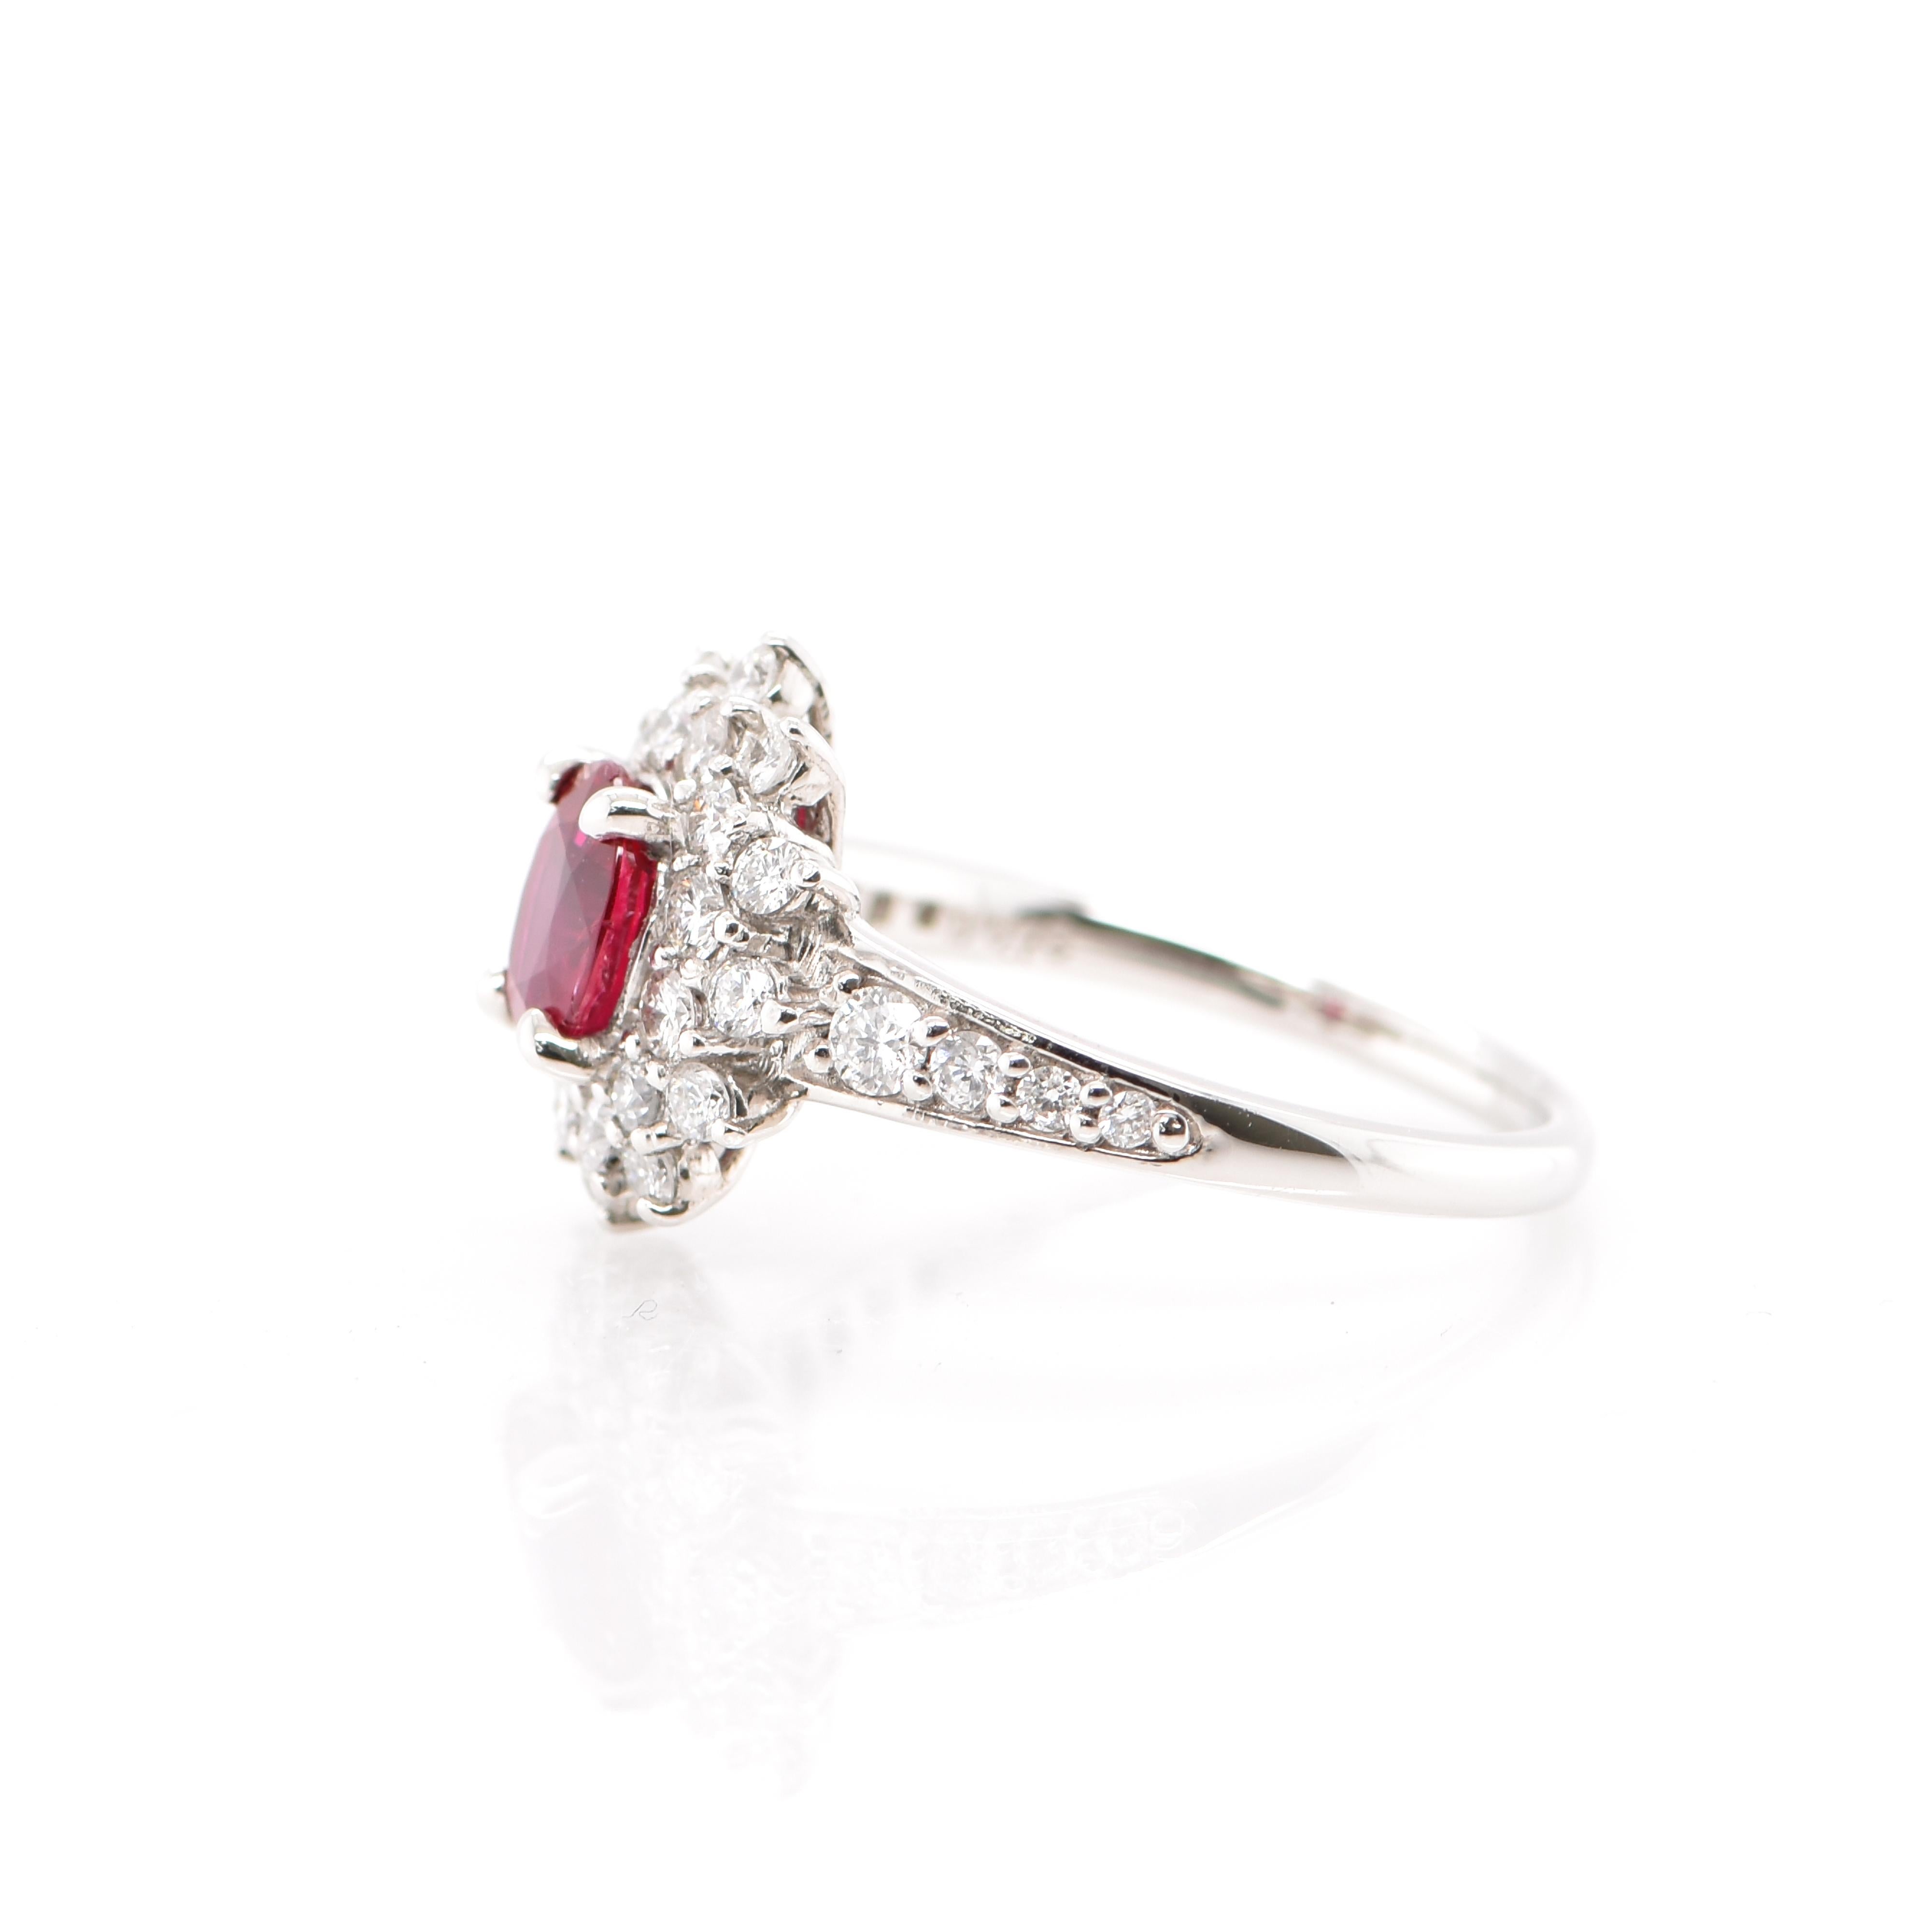 Modern 1.137 Carat Ruby and Diamond Double Halo Ring Set in Platinum